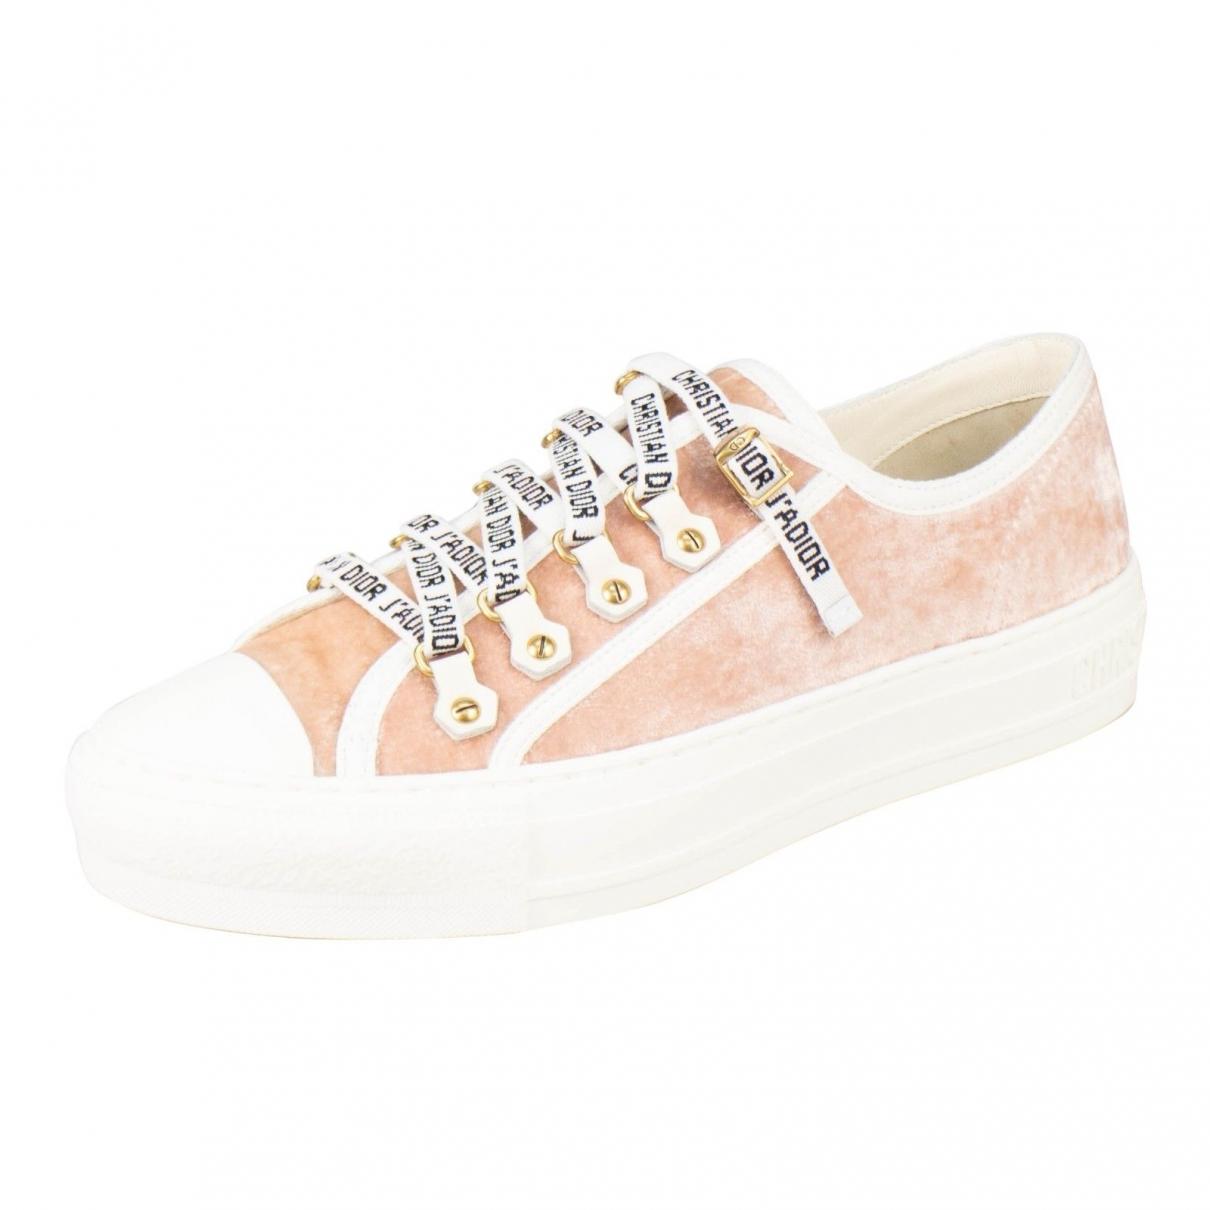 christian dior sneakers pink